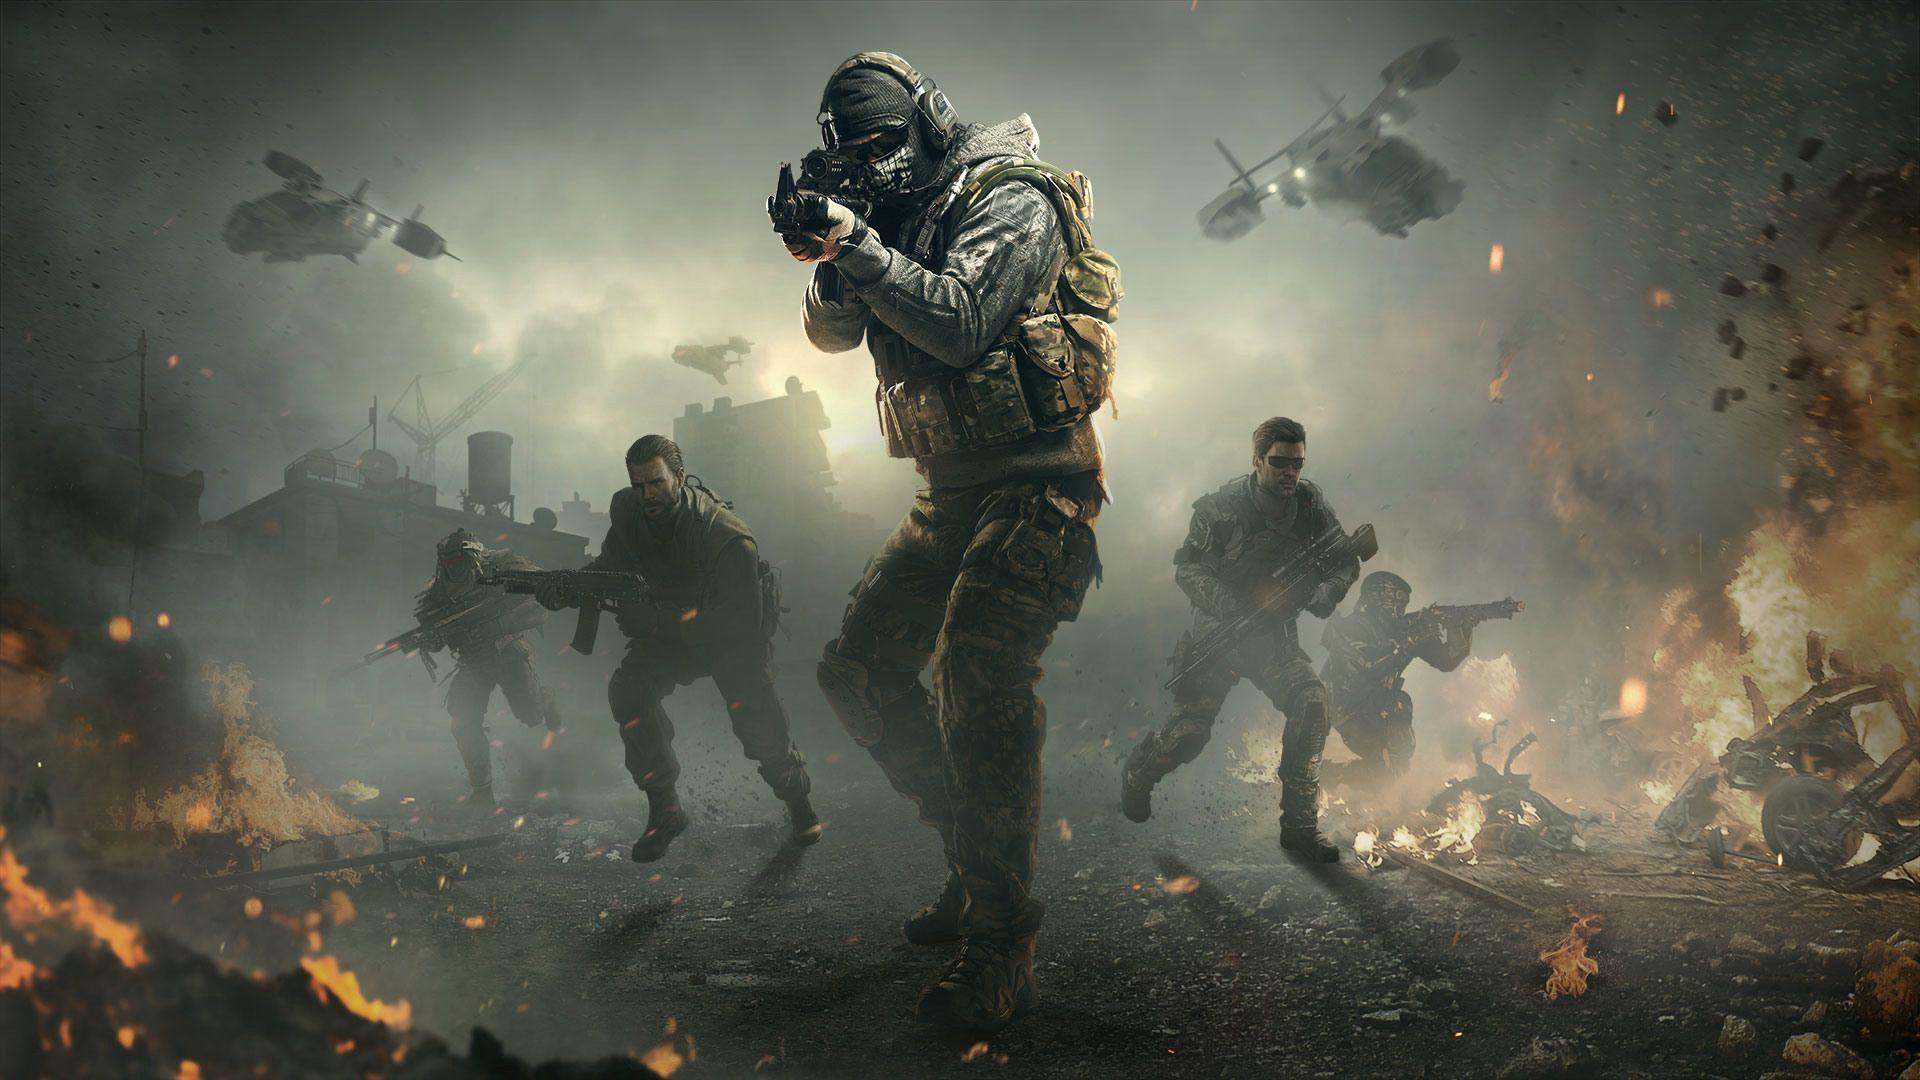 call of duty cold war apk download